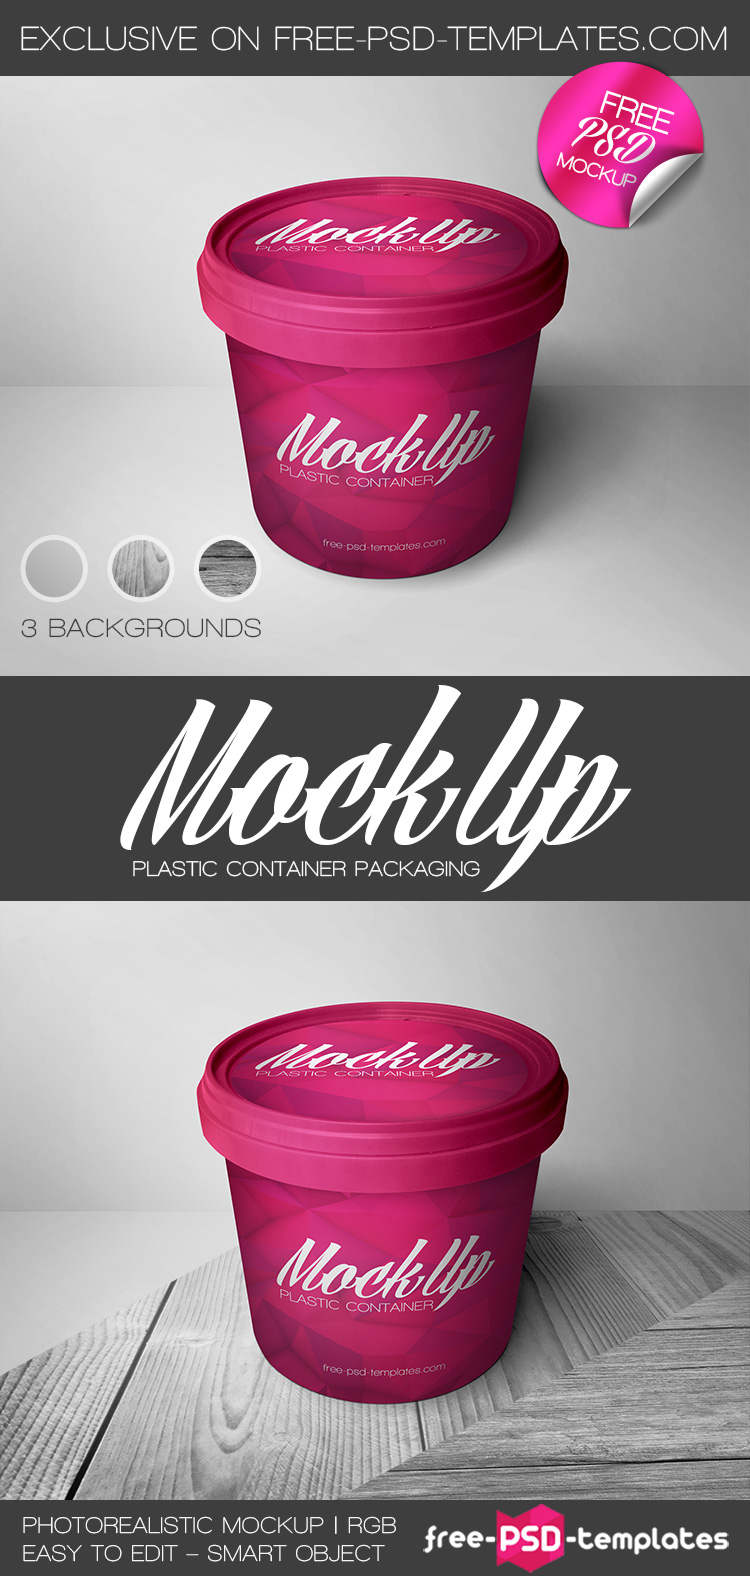 Download Free Plastic Container Packaging Mock Up In Psd Free Psd Templates